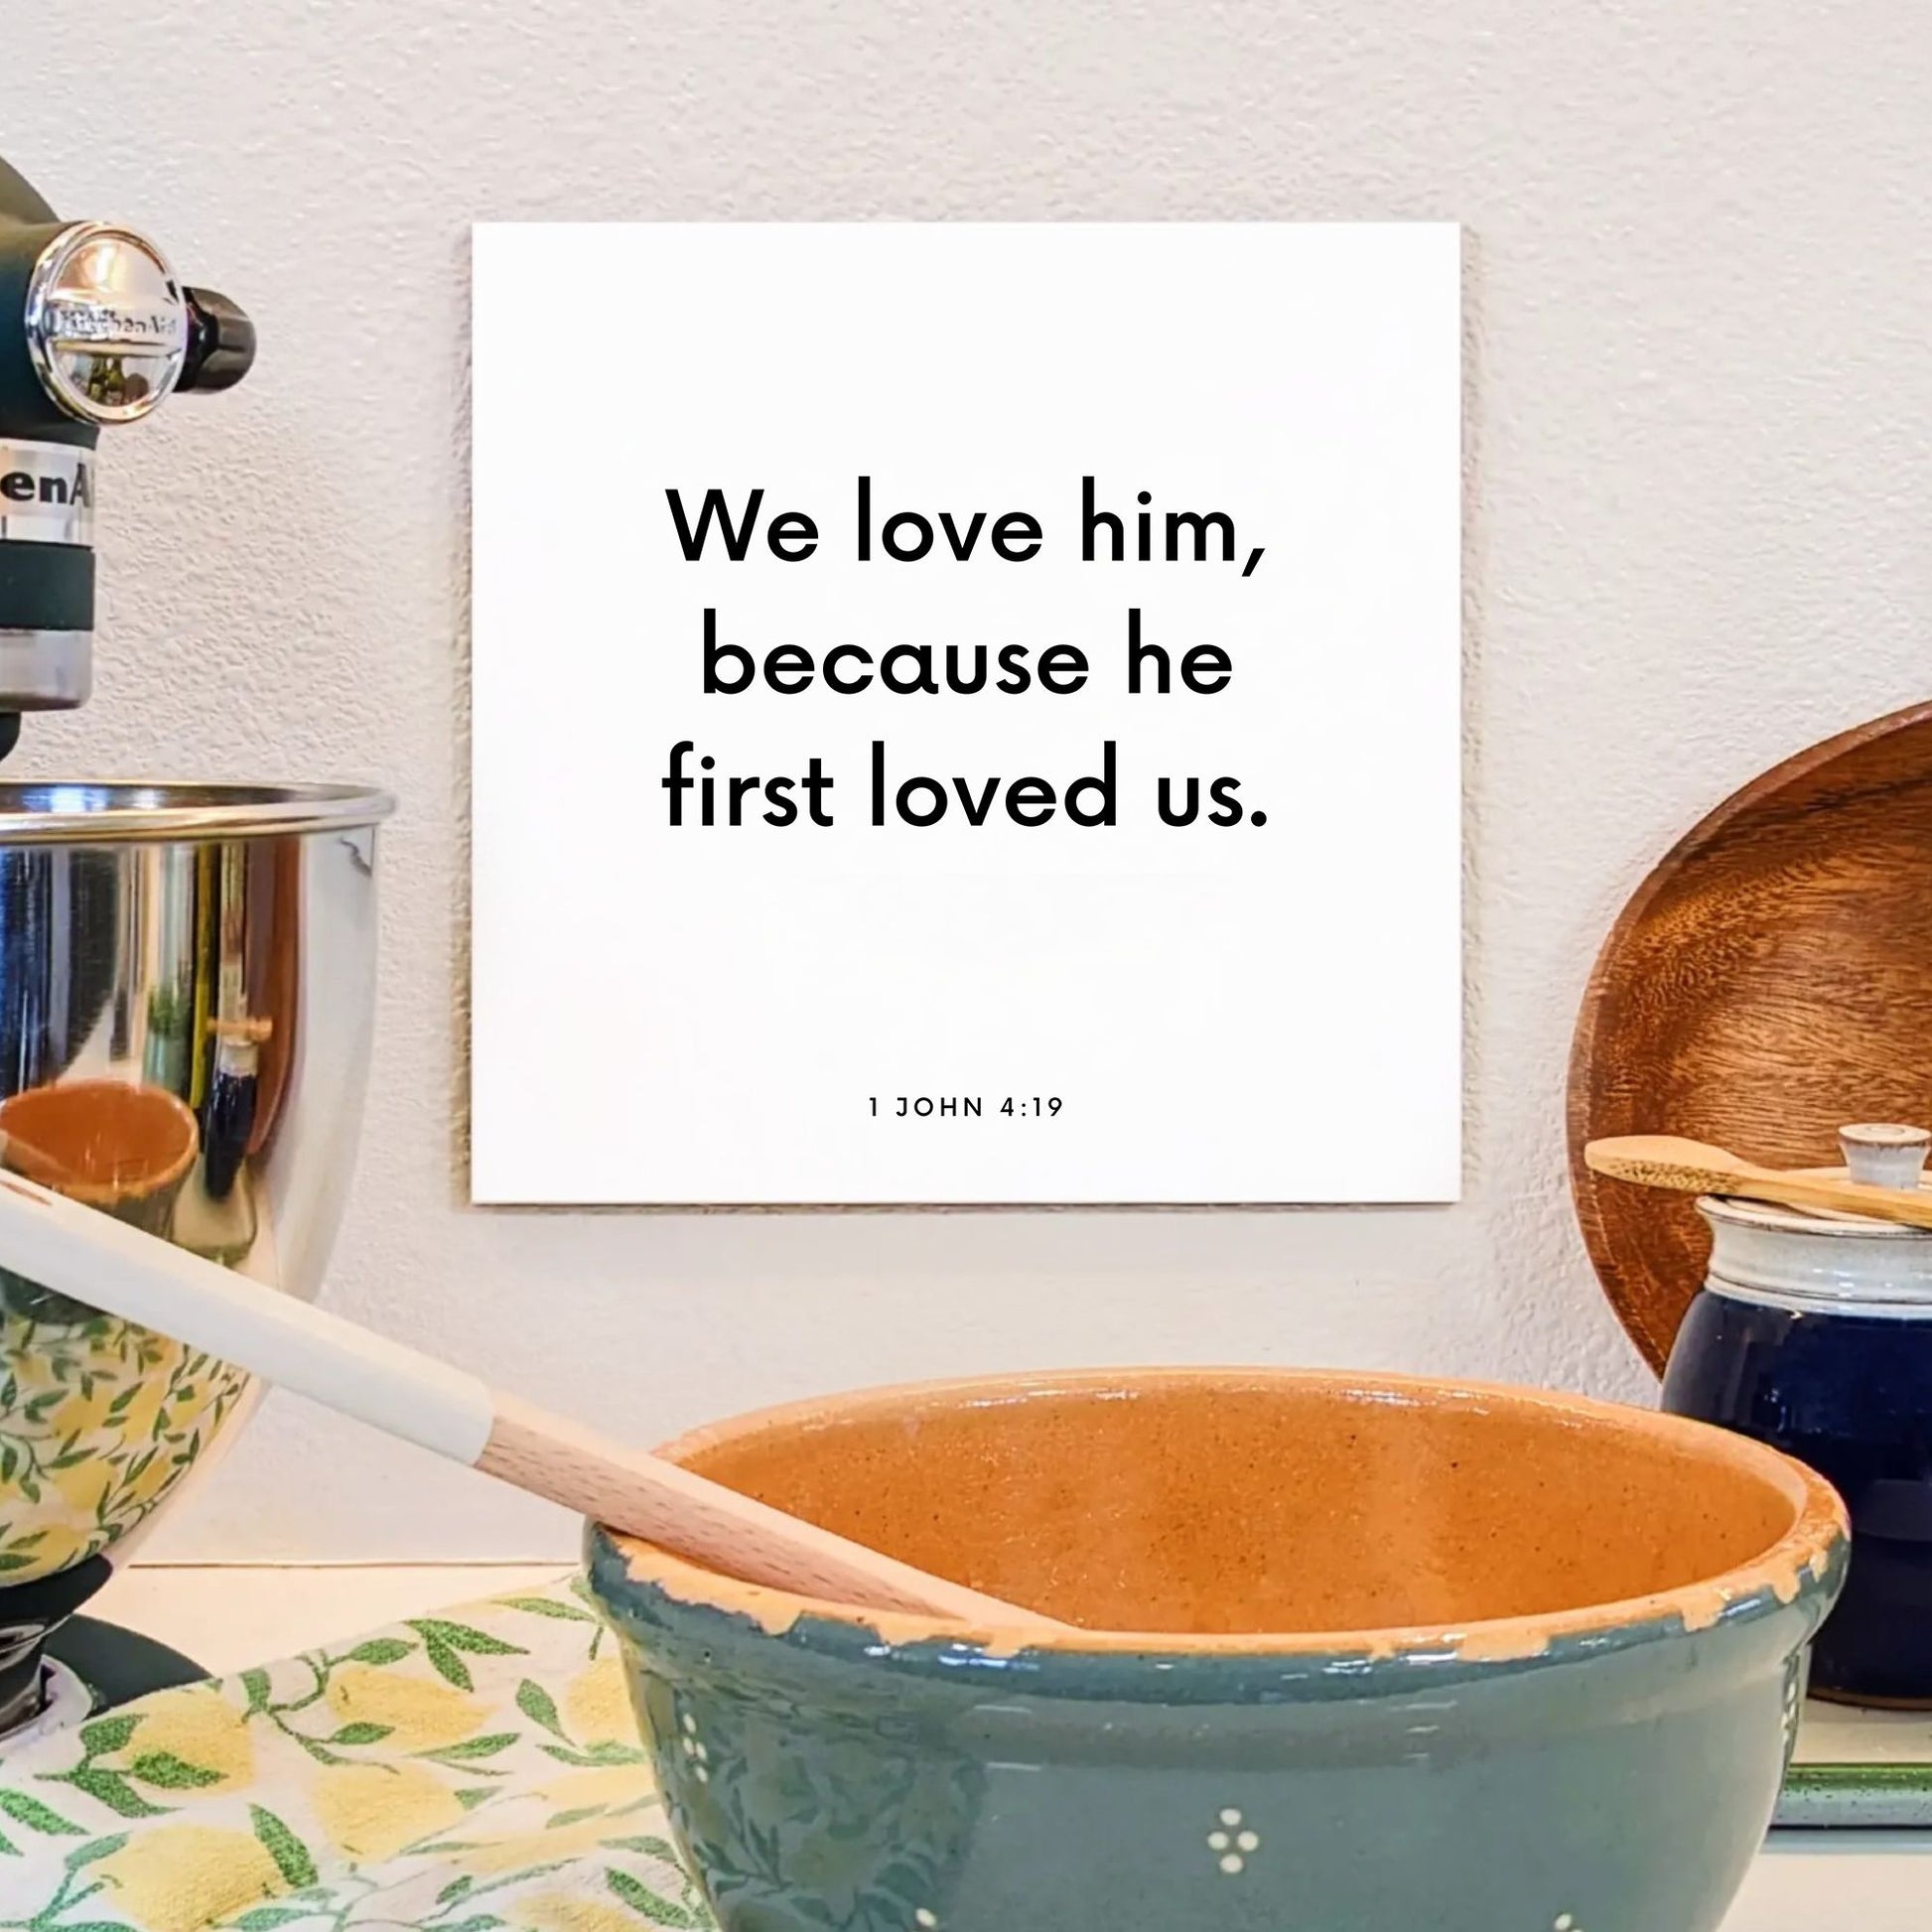 Kitchen mouting of the scripture tile for 1 John 4:19 - "We love him, because he first loved us"